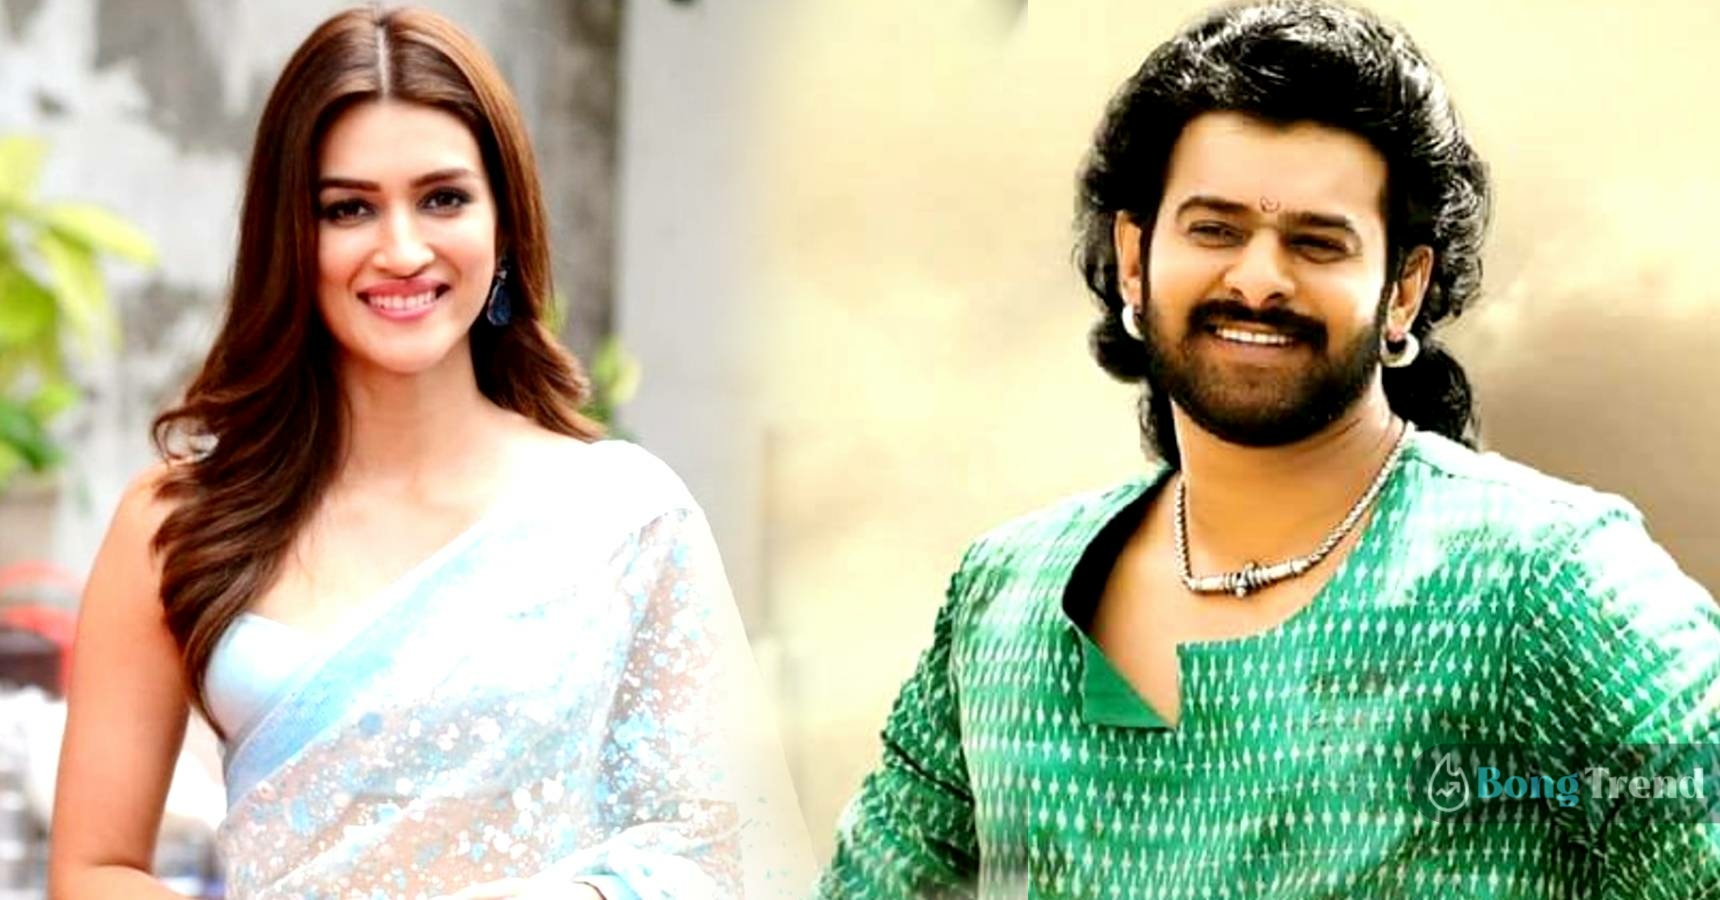 Prabhas and Kriti Sanon’s dating rumours are just publicity stunt, claims source